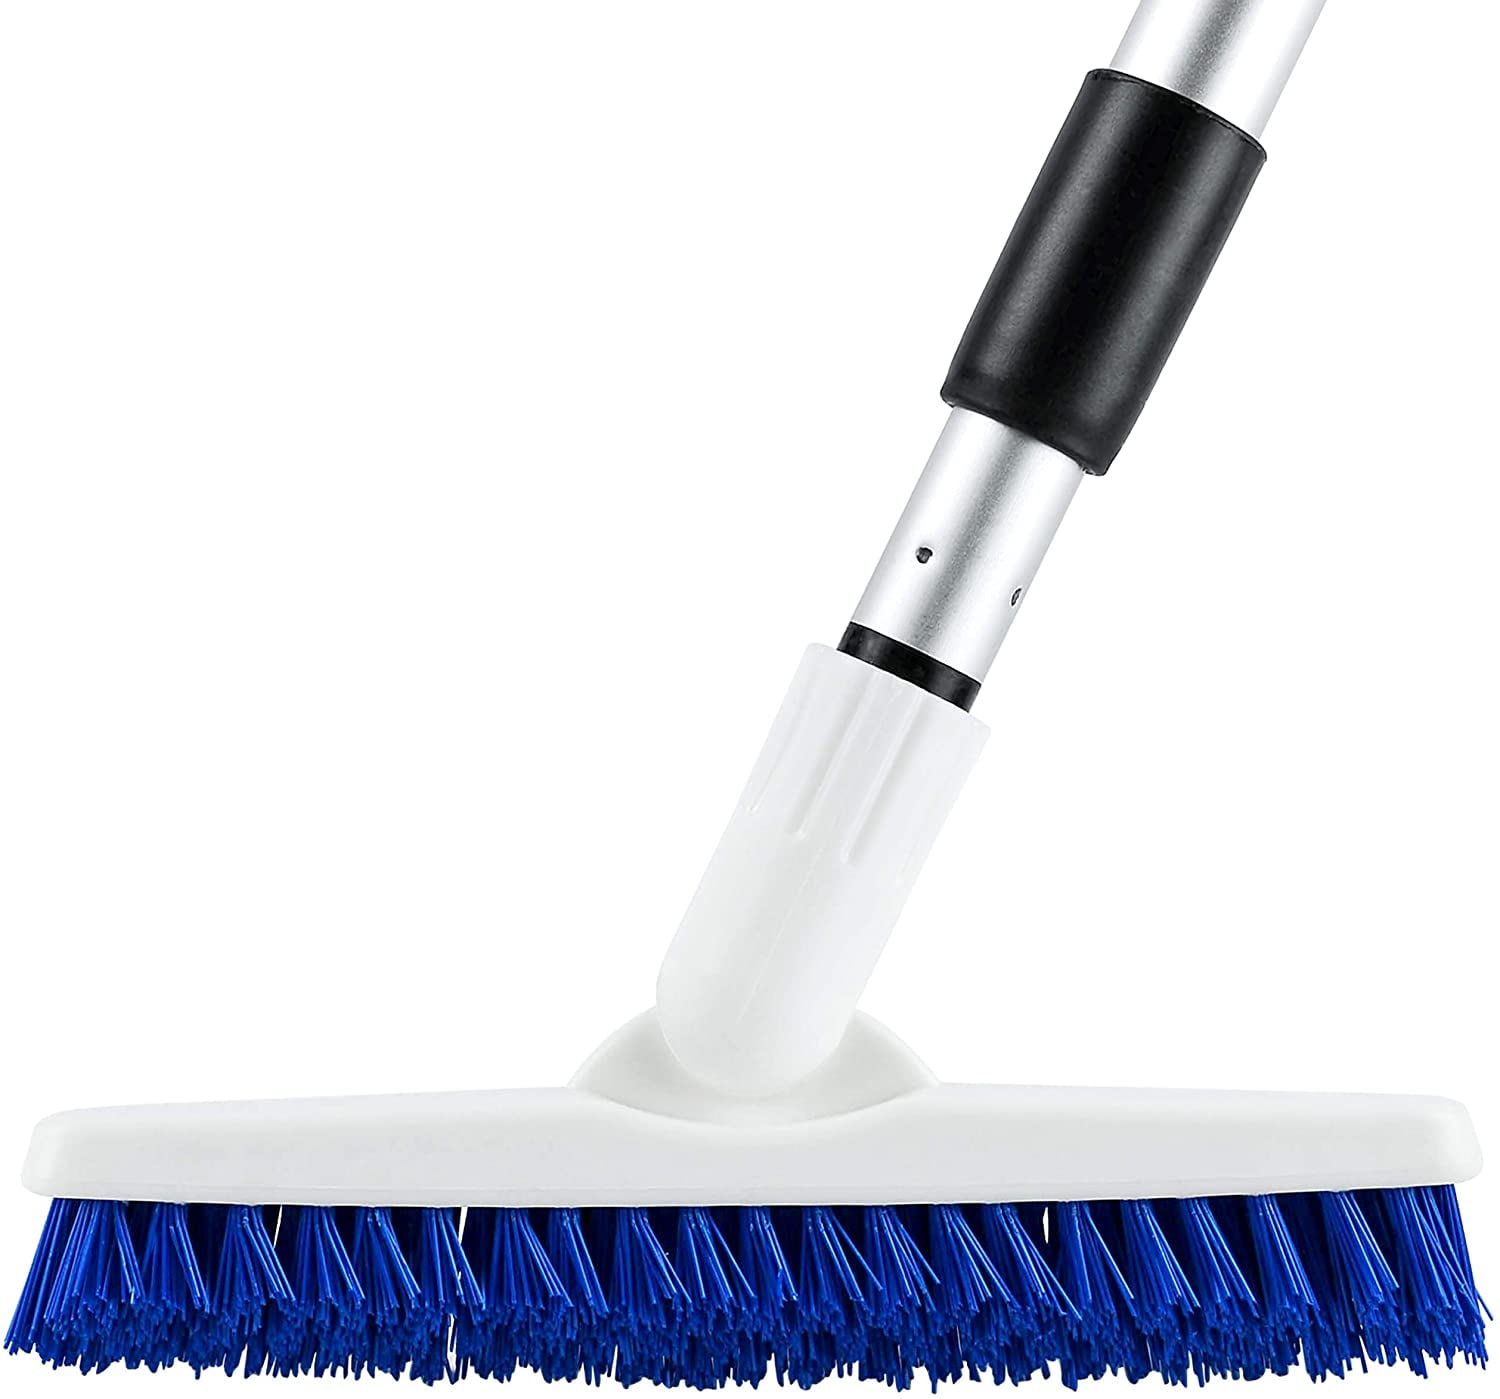 Professor Amos 56 Long Grout Brush with Squeegee - 21037615